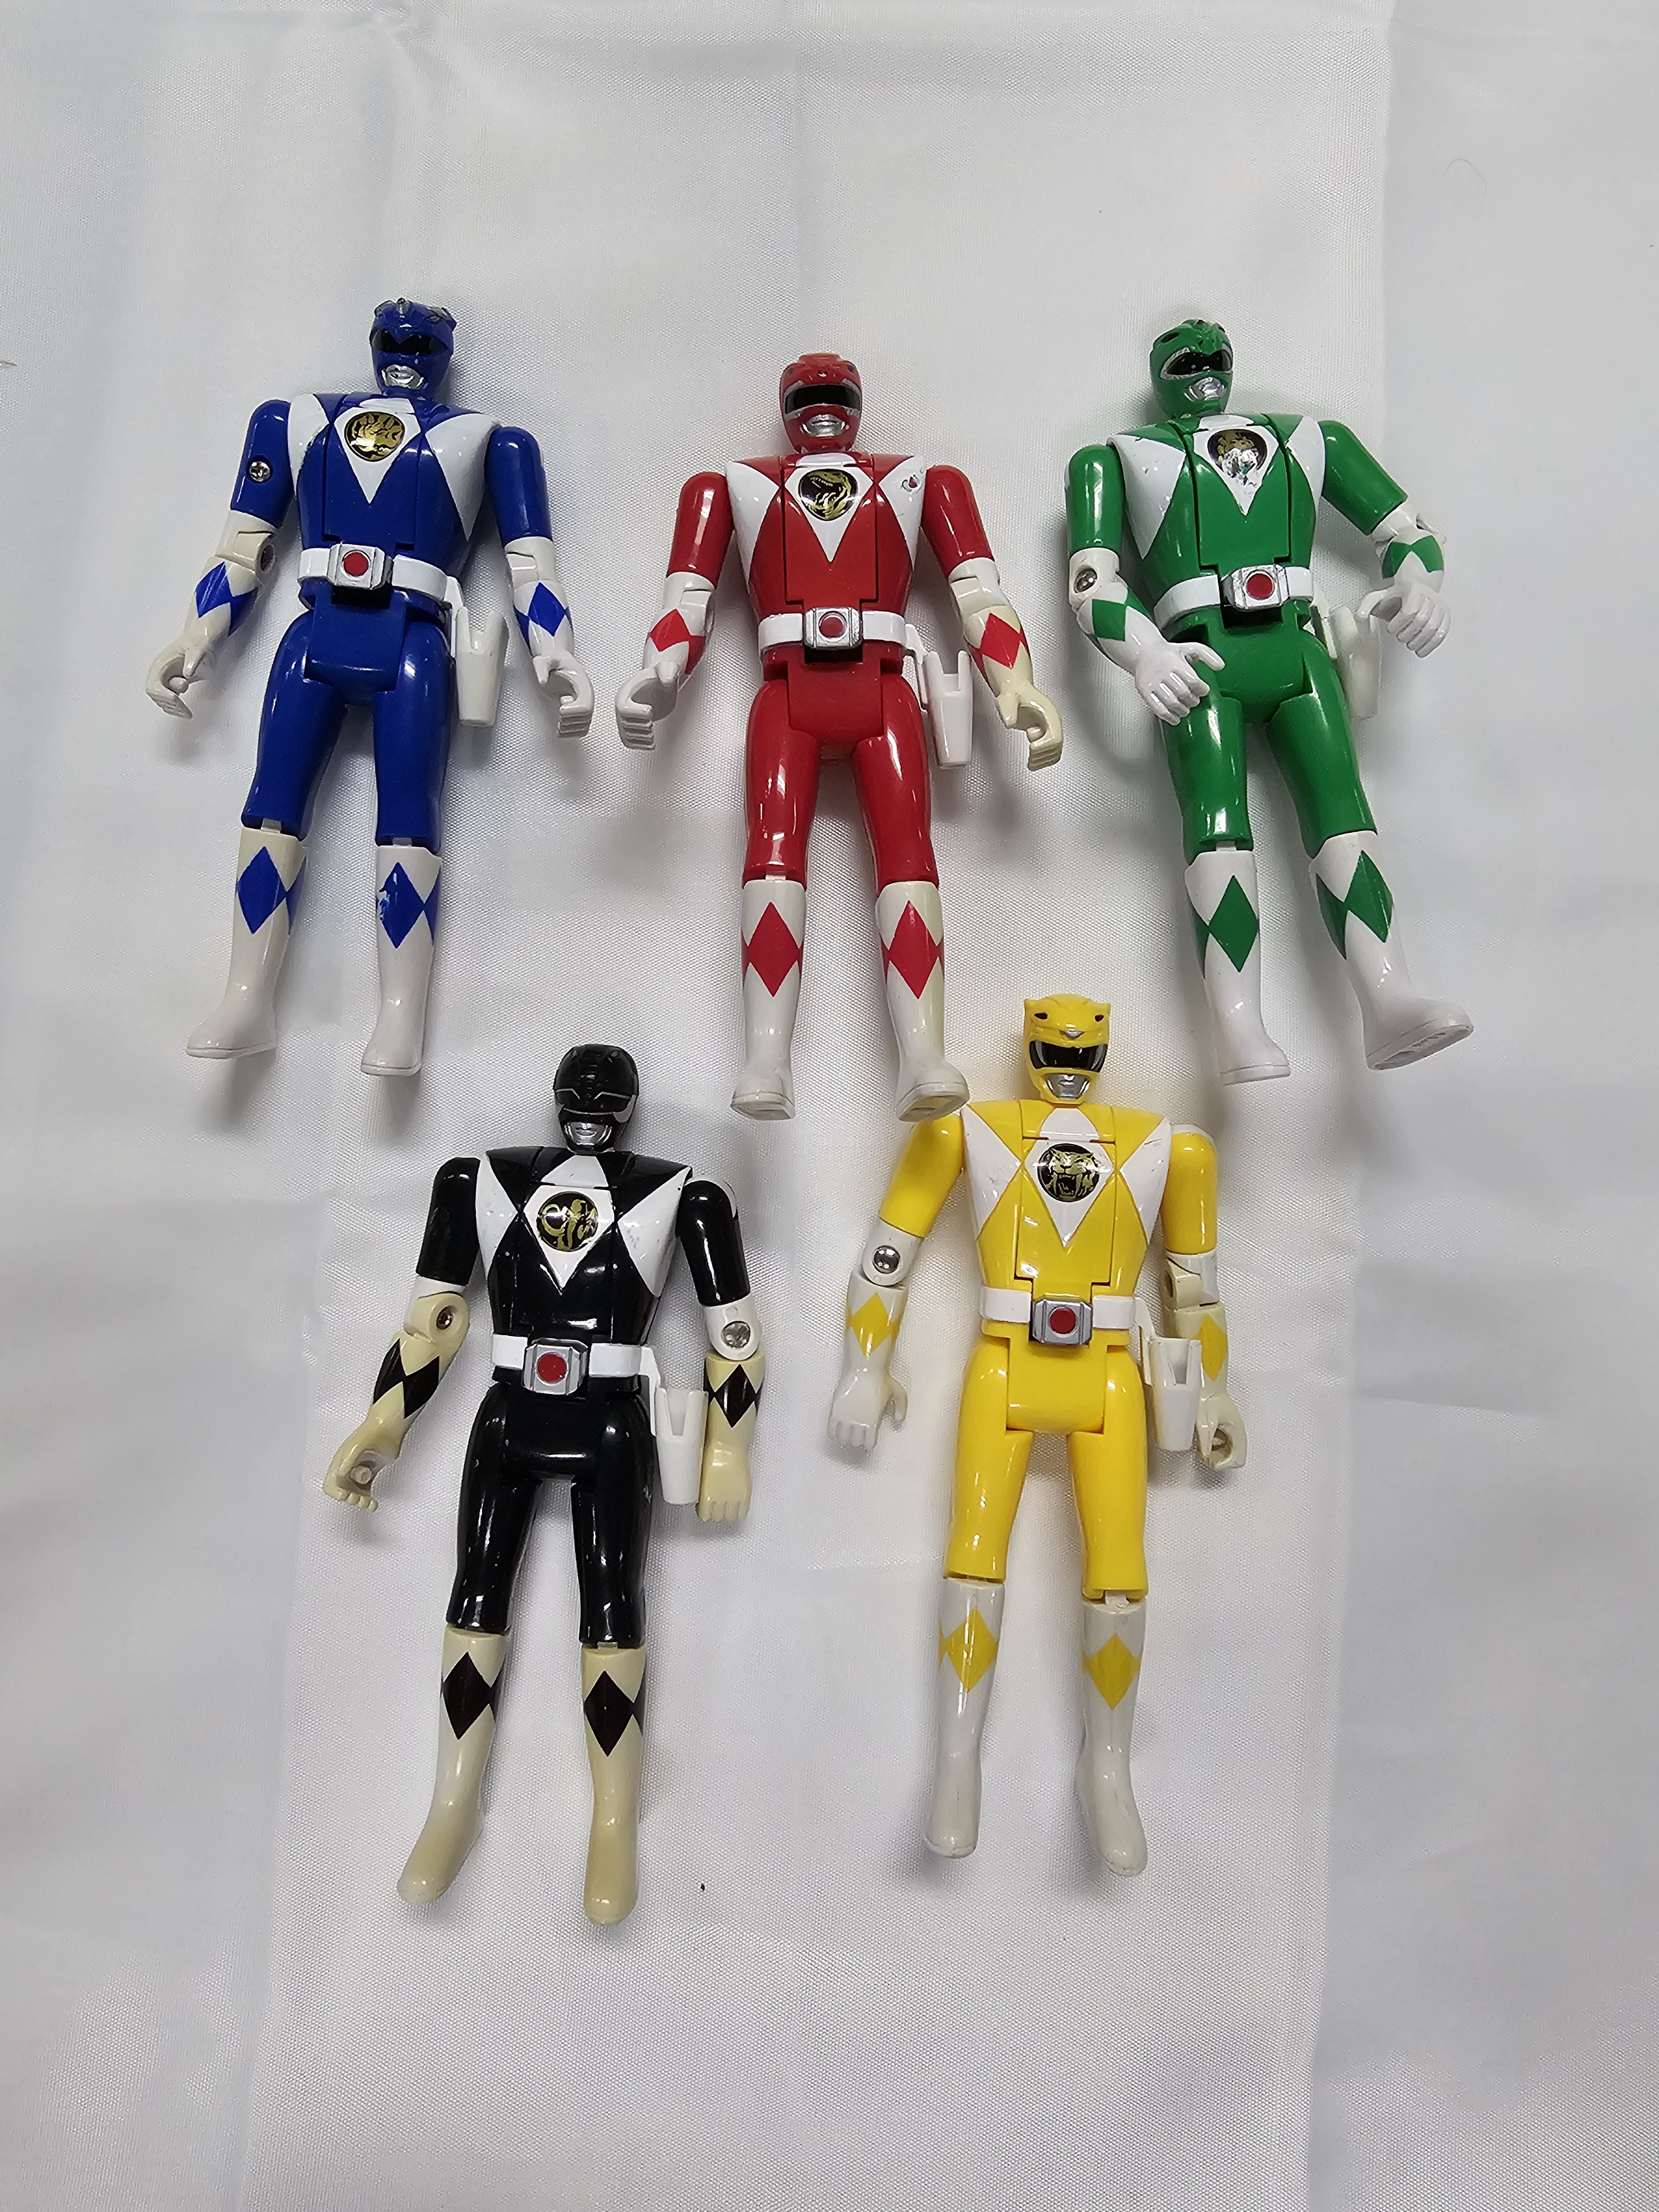 1993 Mighty Morphin Power Rangers Flip-Head Action Figures Pre-Owned